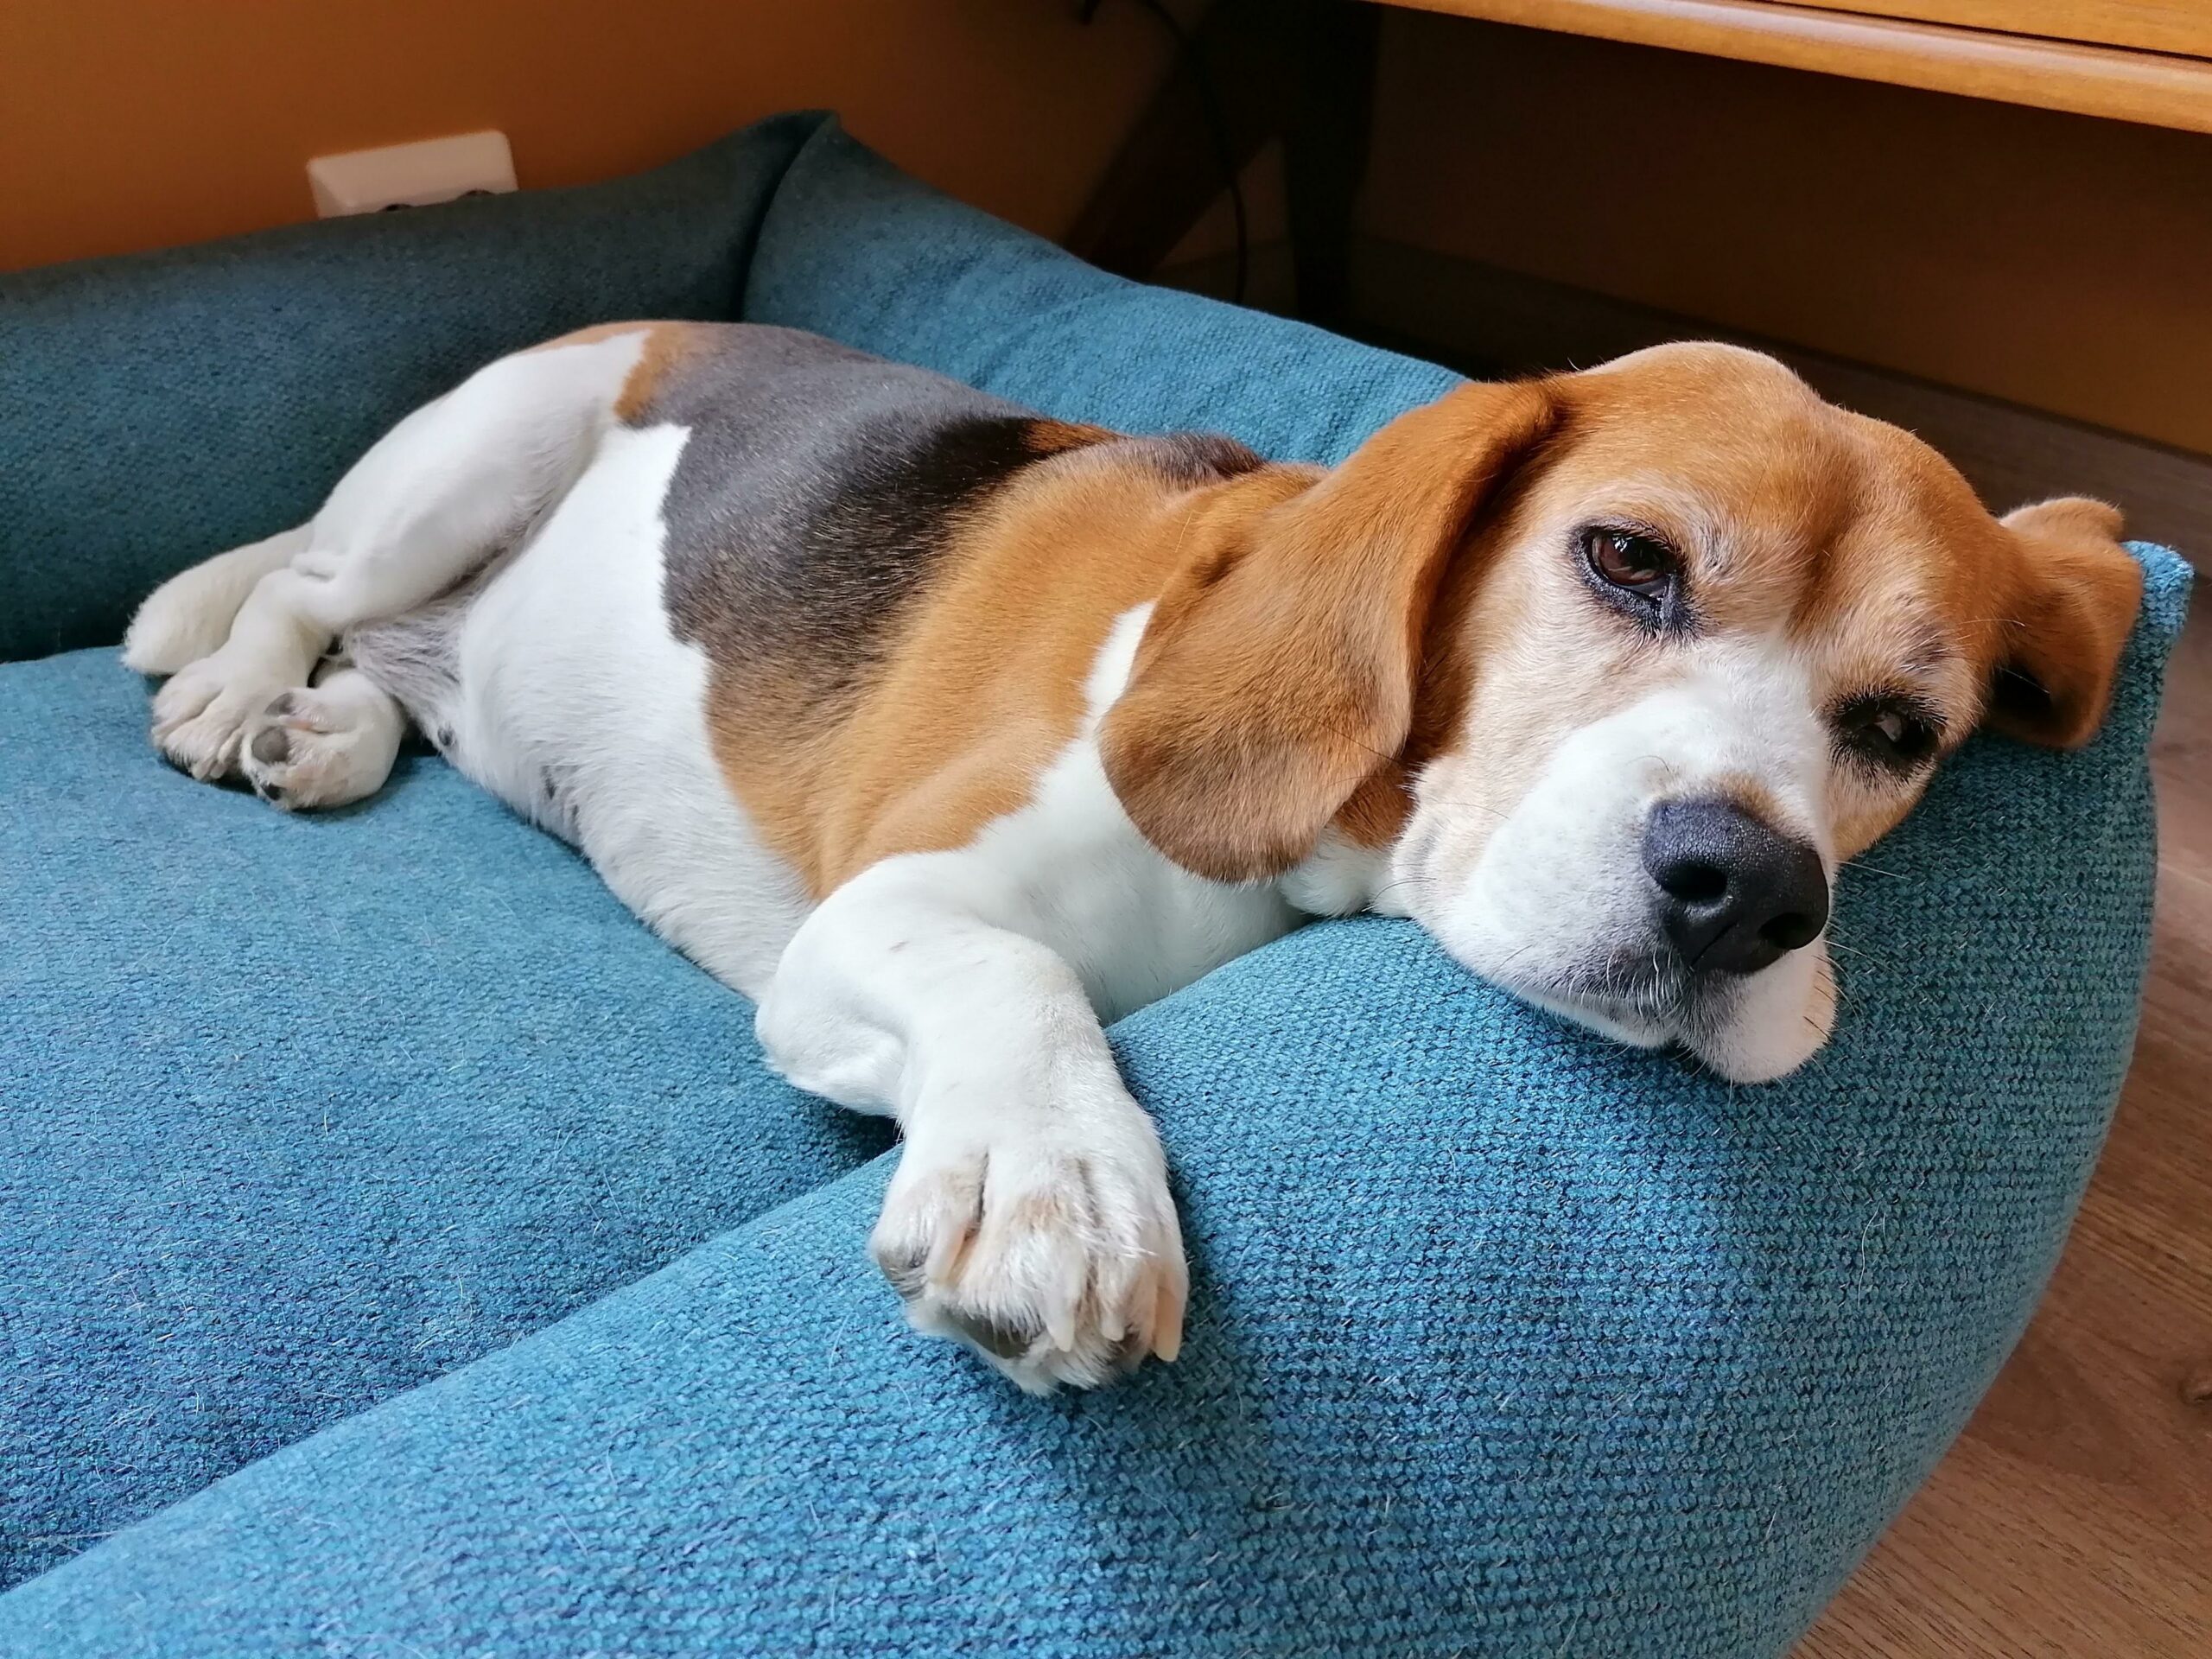 A tired beagle sleepily lays on a dog bed.